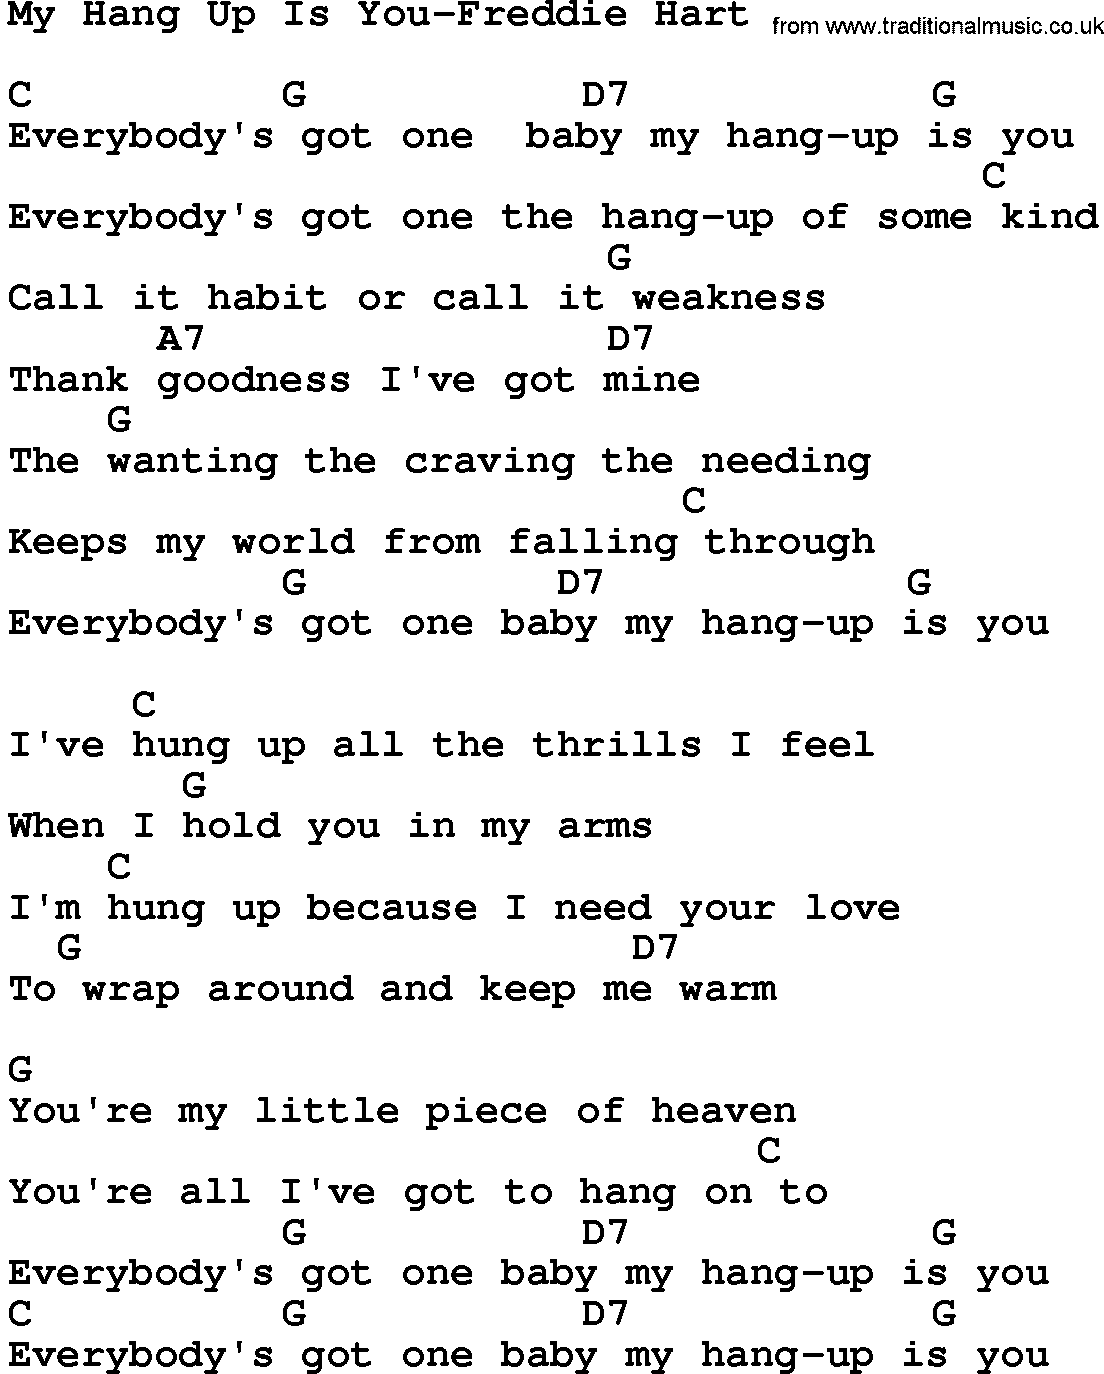 Country music song: My Hang Up Is You-Freddie Hart lyrics and chords